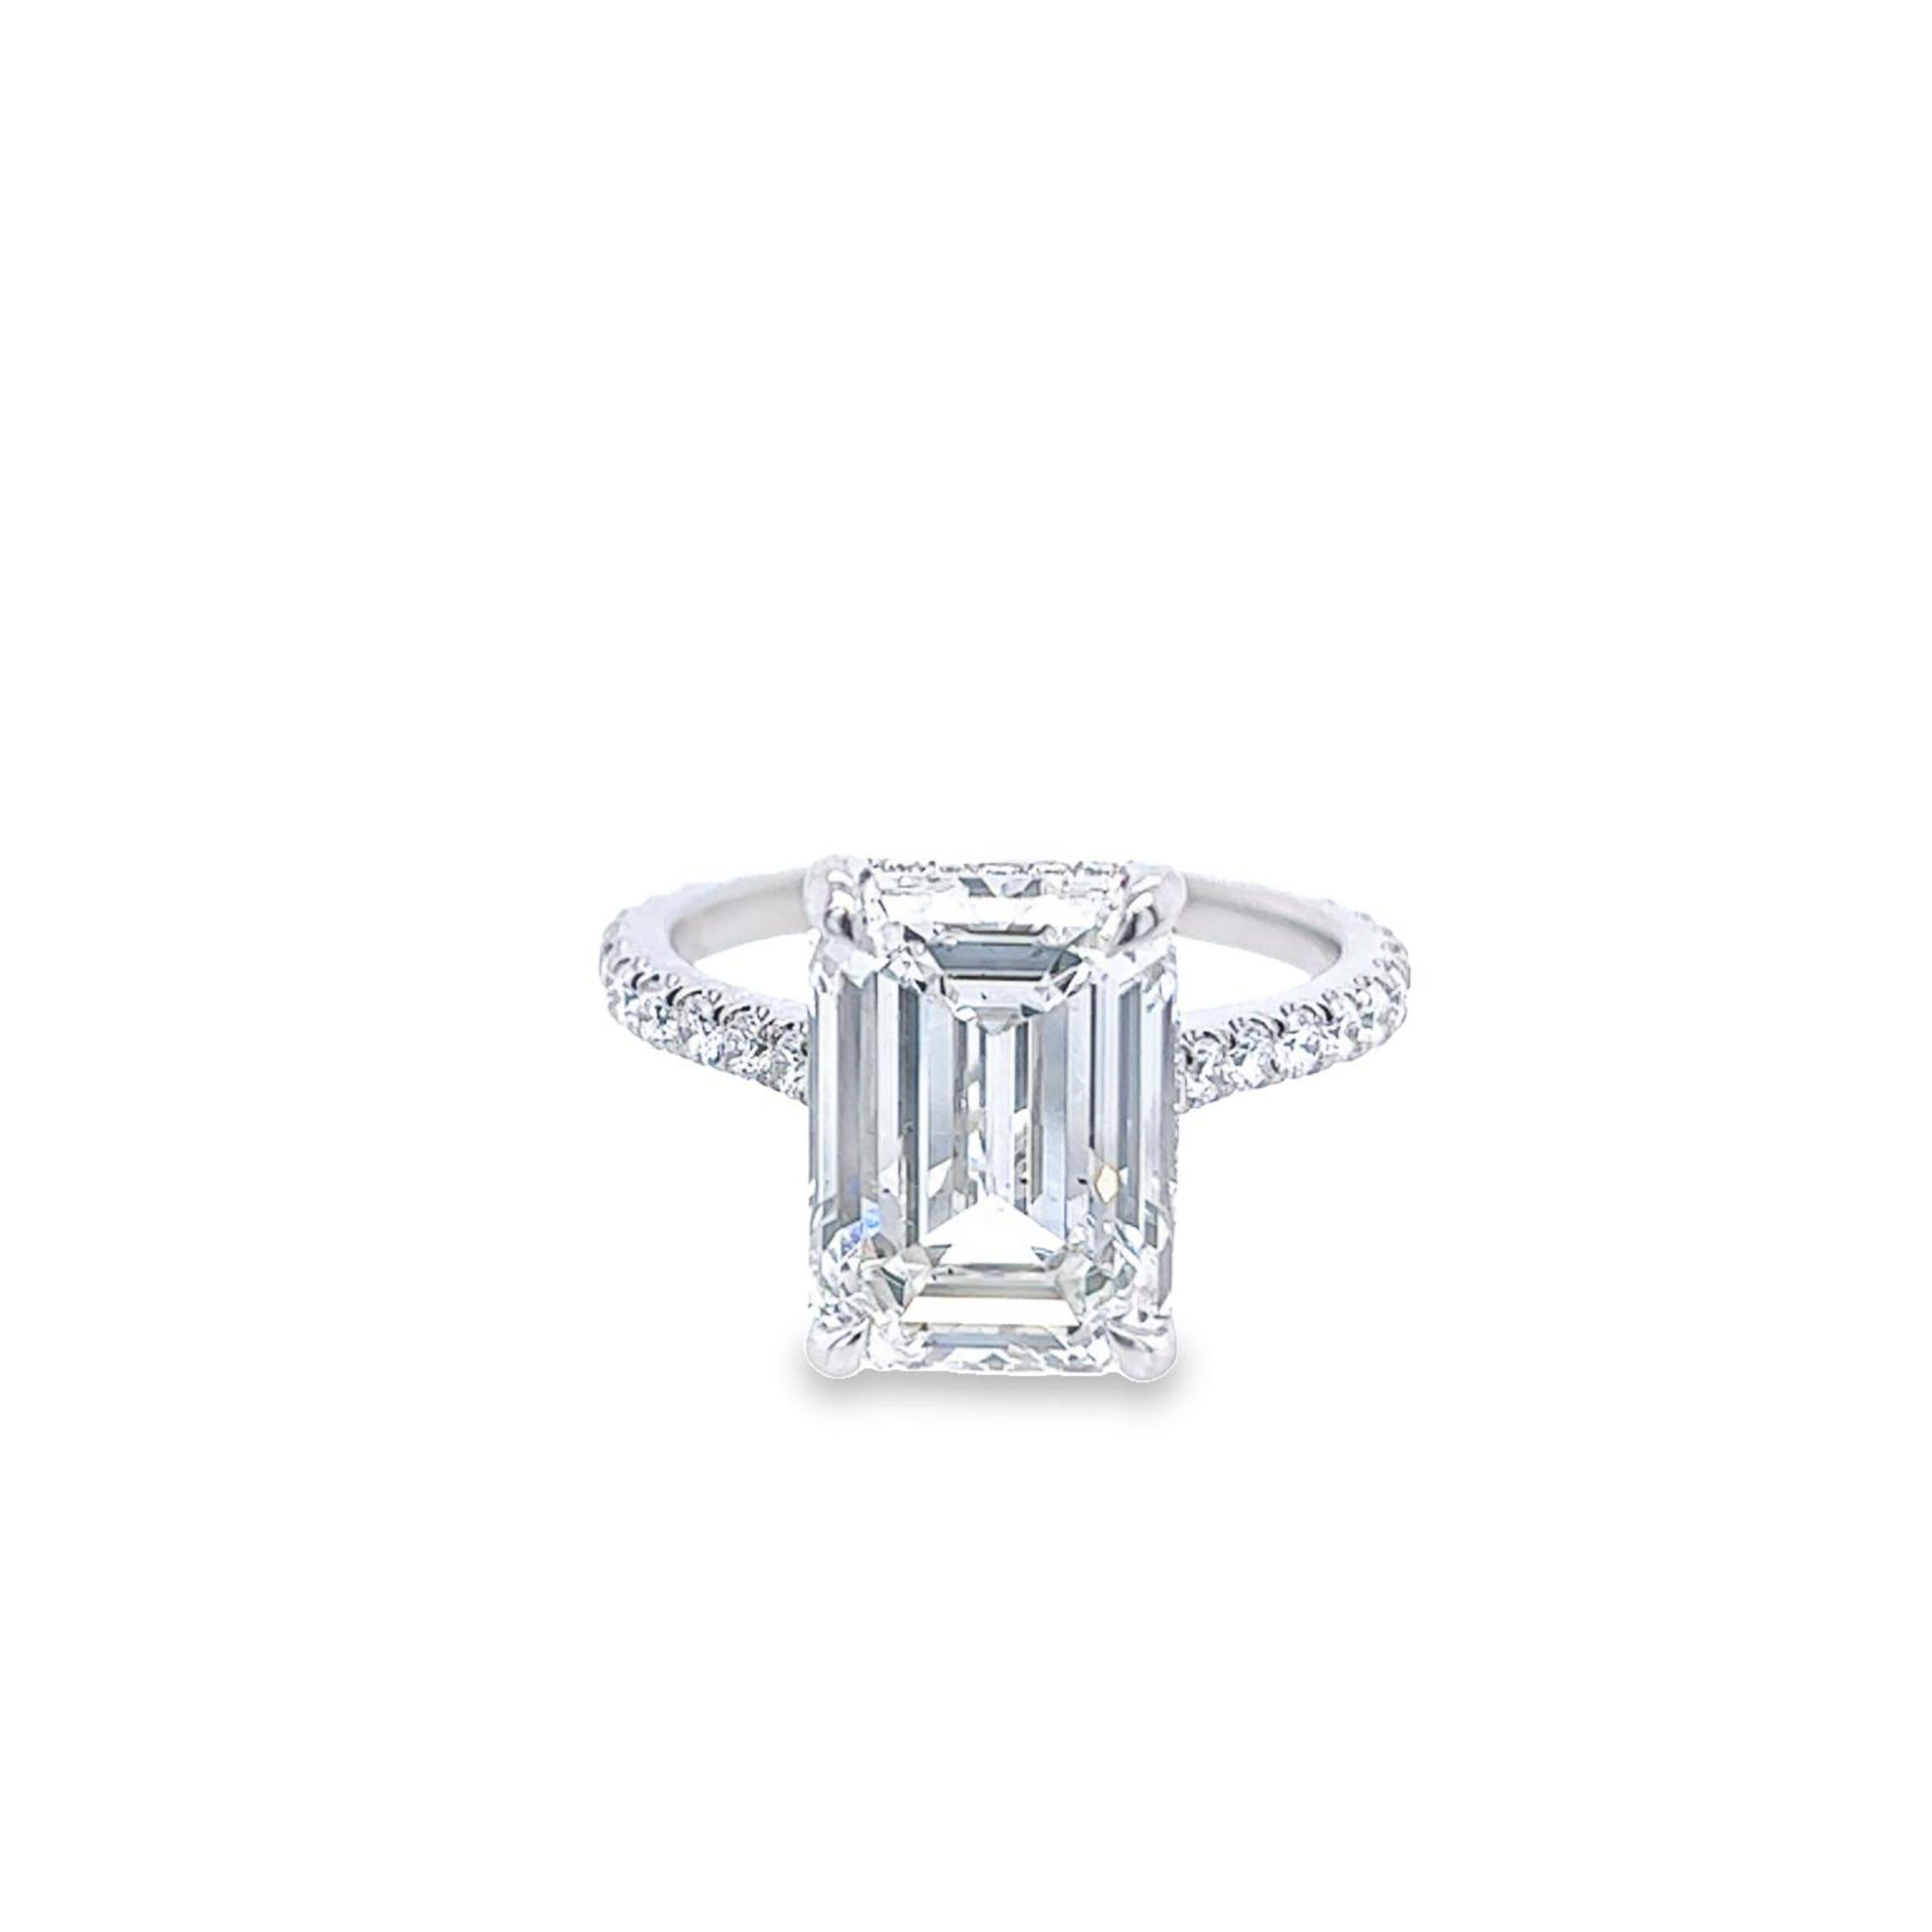 Rosenberg Diamonds & Co. 5.41 carat Emerald cut H color SI1 clarity is accompanied by a GIA certificate. This breathtaking Emerald is full of brilliance and an exceptional SI1 that is set in a handmade platinum setting and continues its elegance